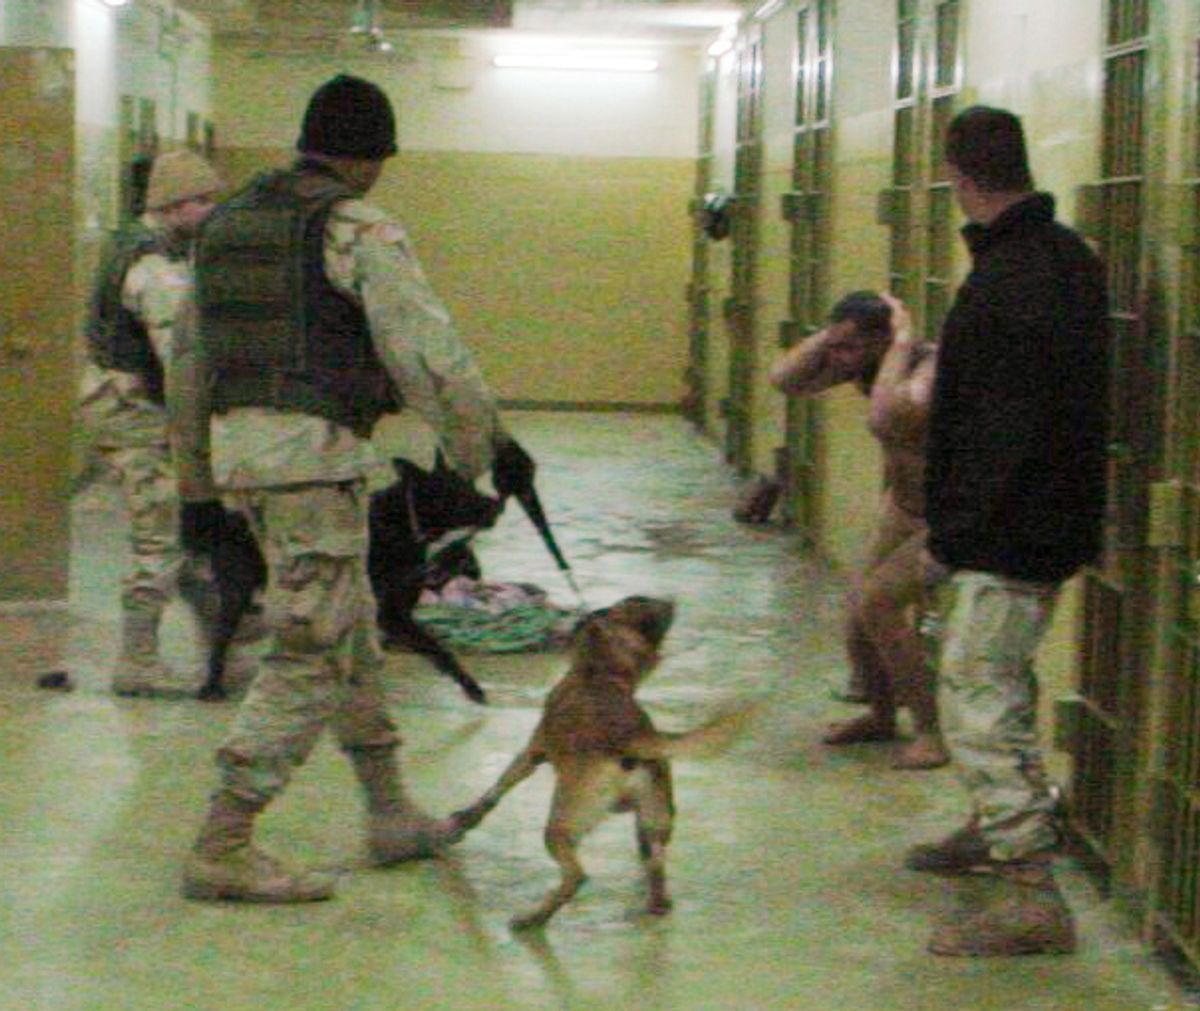 This Dec. 12, 2003 file image shows Sgt. Michael Smith, left, with his black dog Marco, Sgt. Santos Cardona, second right, with his Belgian shepherd Duco, detainee Mohammed Bollendia and Pvt. Ivan L. Frederick II, right, during an incident at the Abu Ghraib prison in Baghdad, Iraq. 